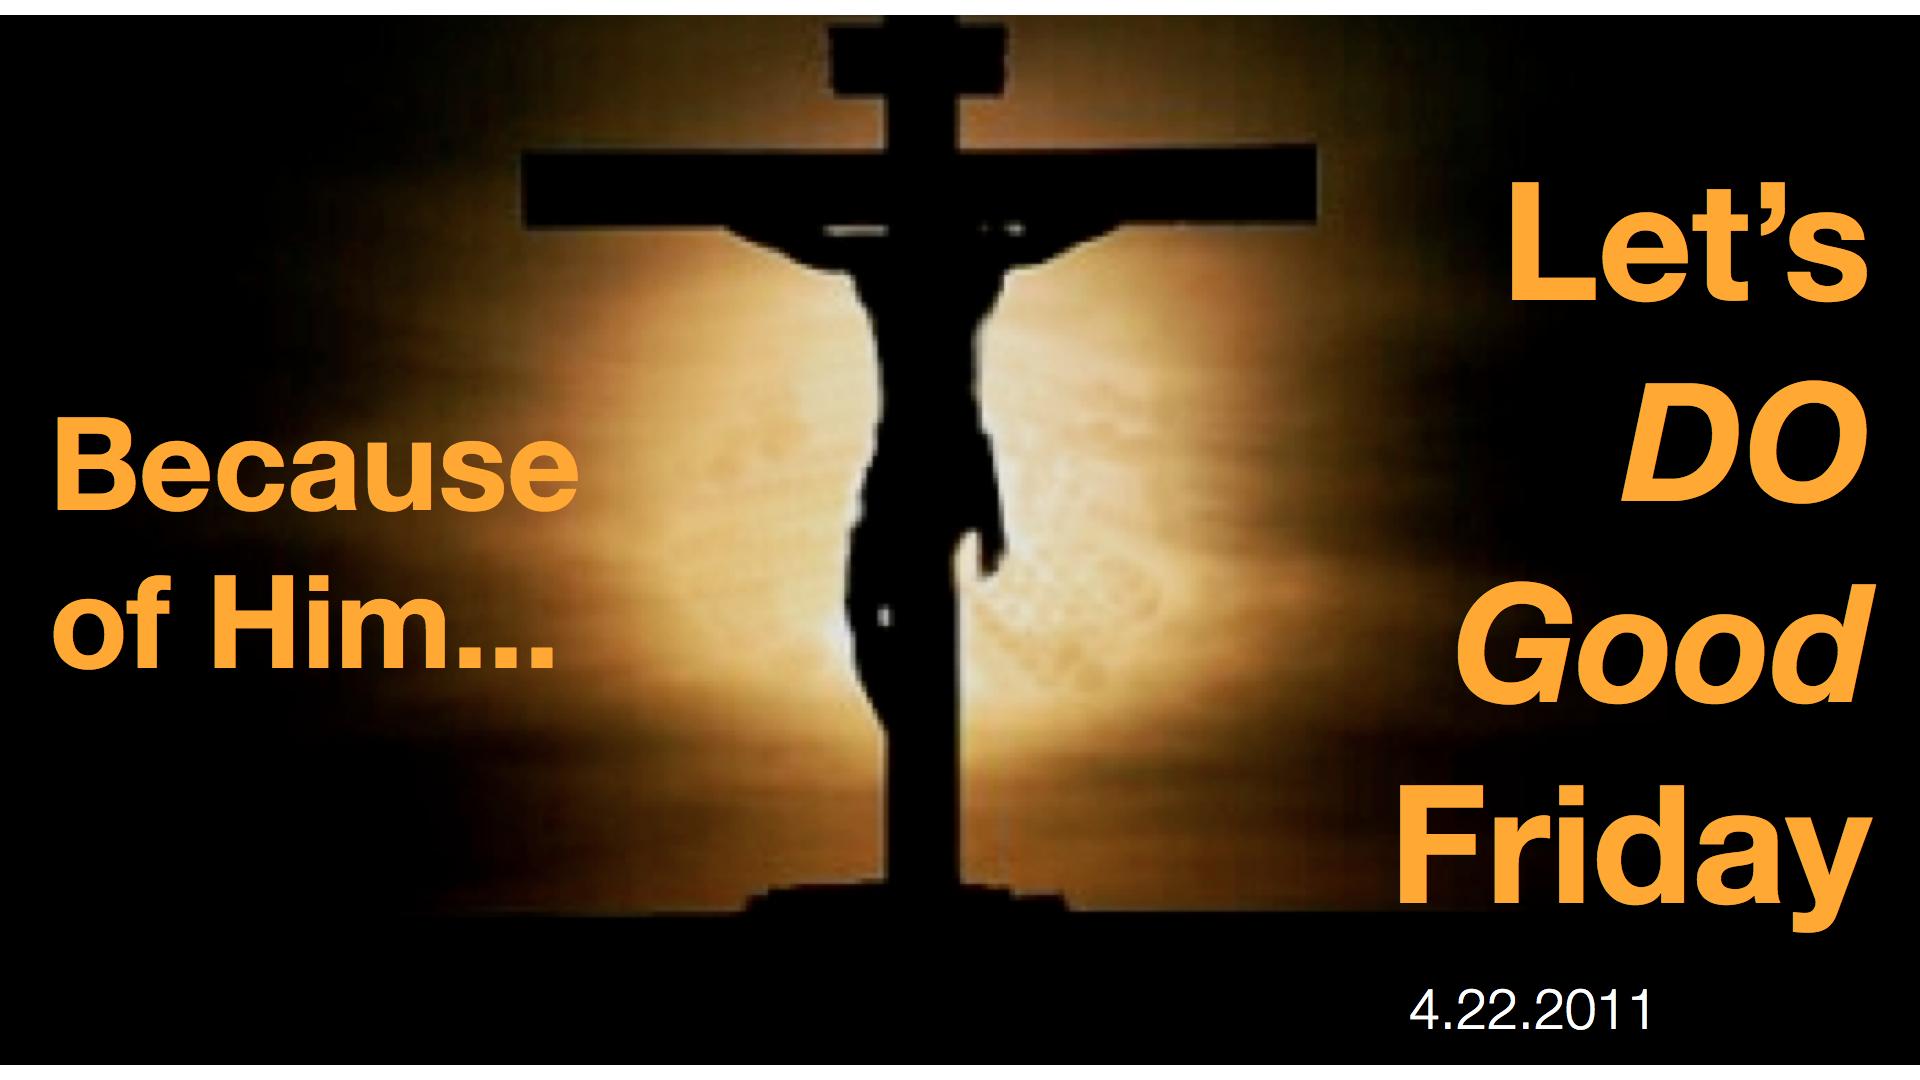 Good Friday Background and Wallpaper. Download Printable